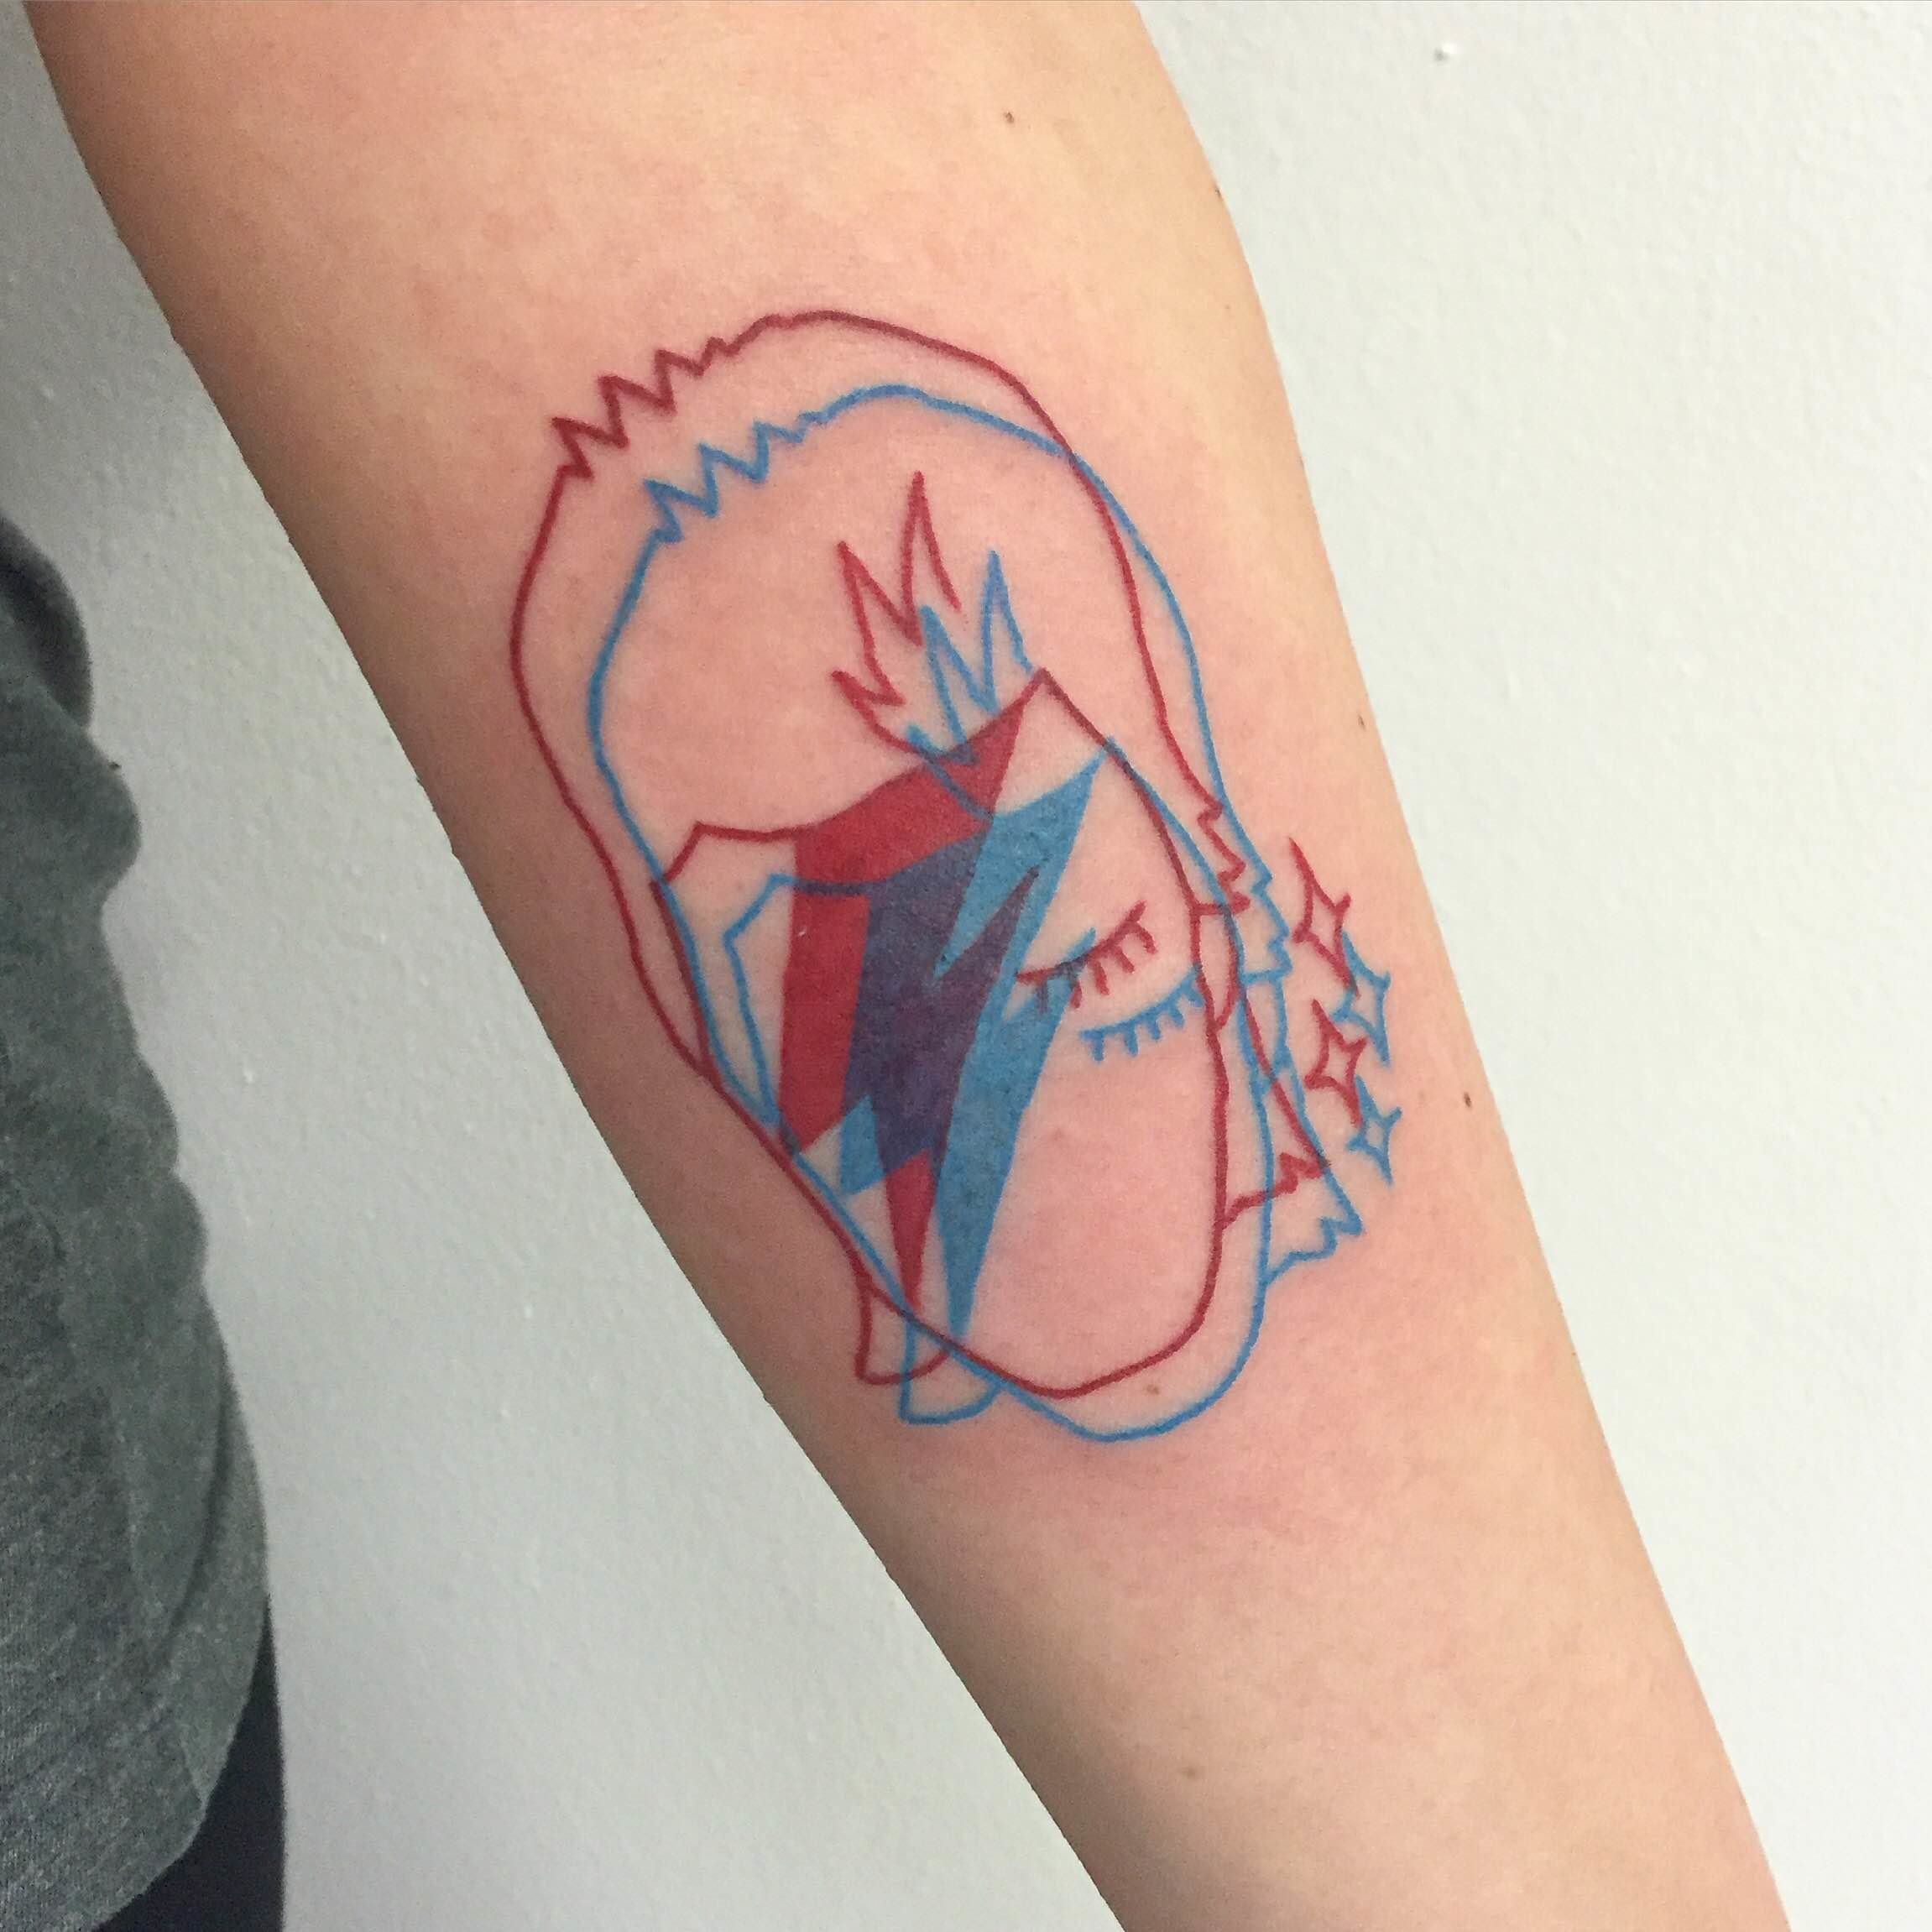 The Ultimate Guide to 3D Tattoos - Tattooing 101